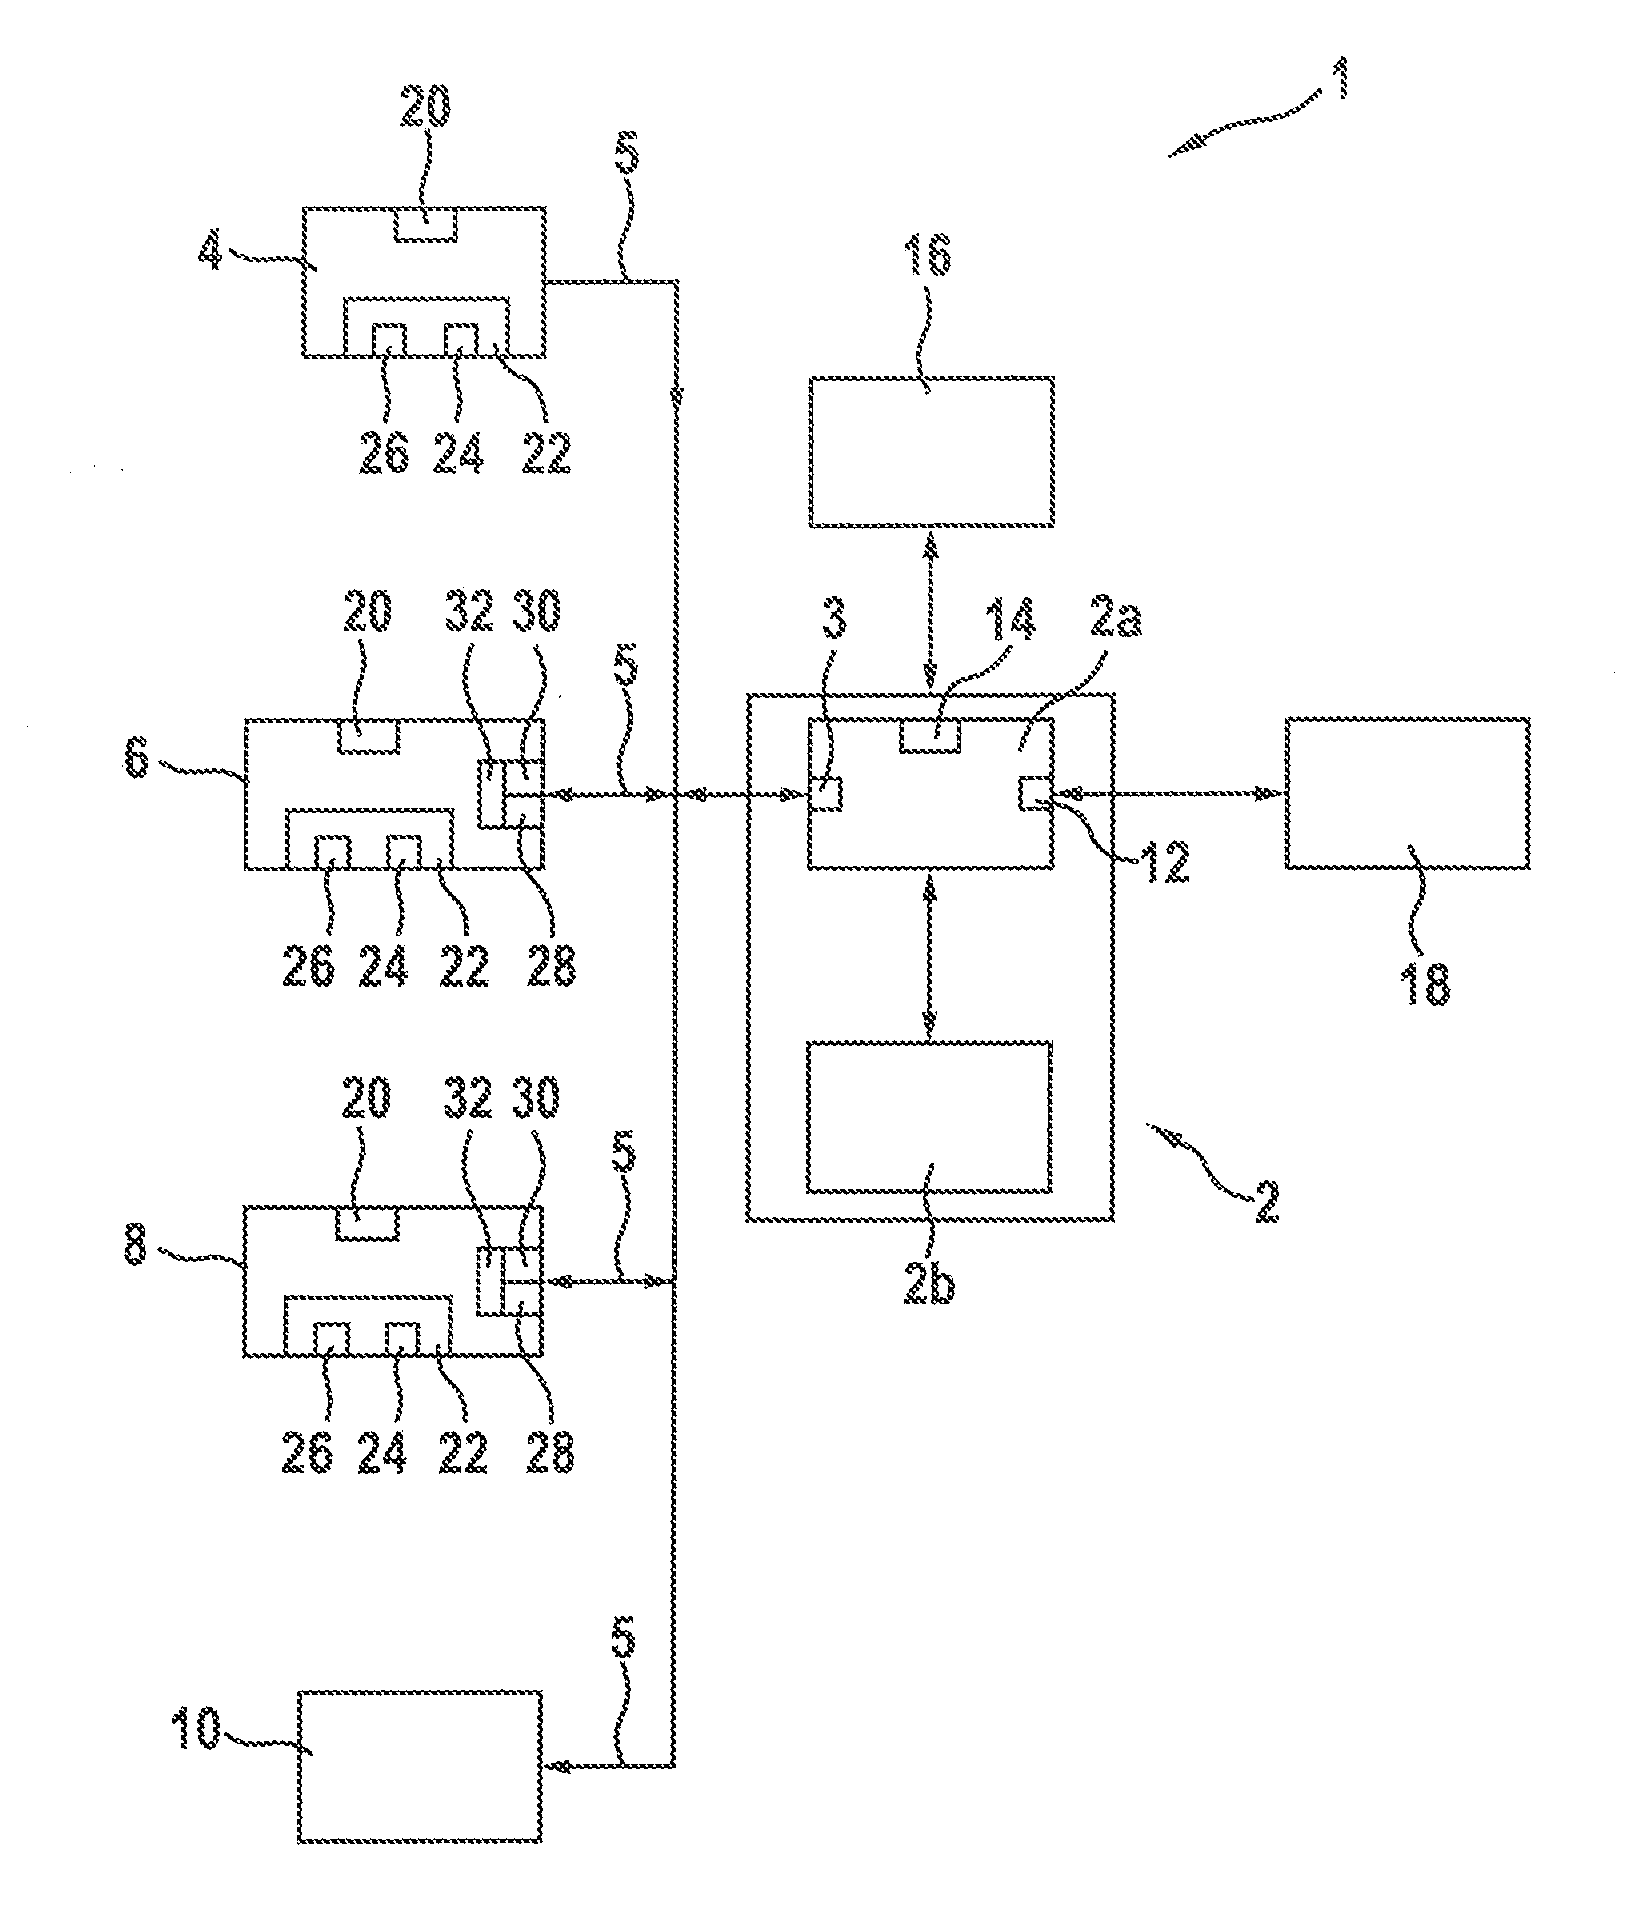 Information system and method for processing information, in particular for assisting work in a motor vehicle repair shop